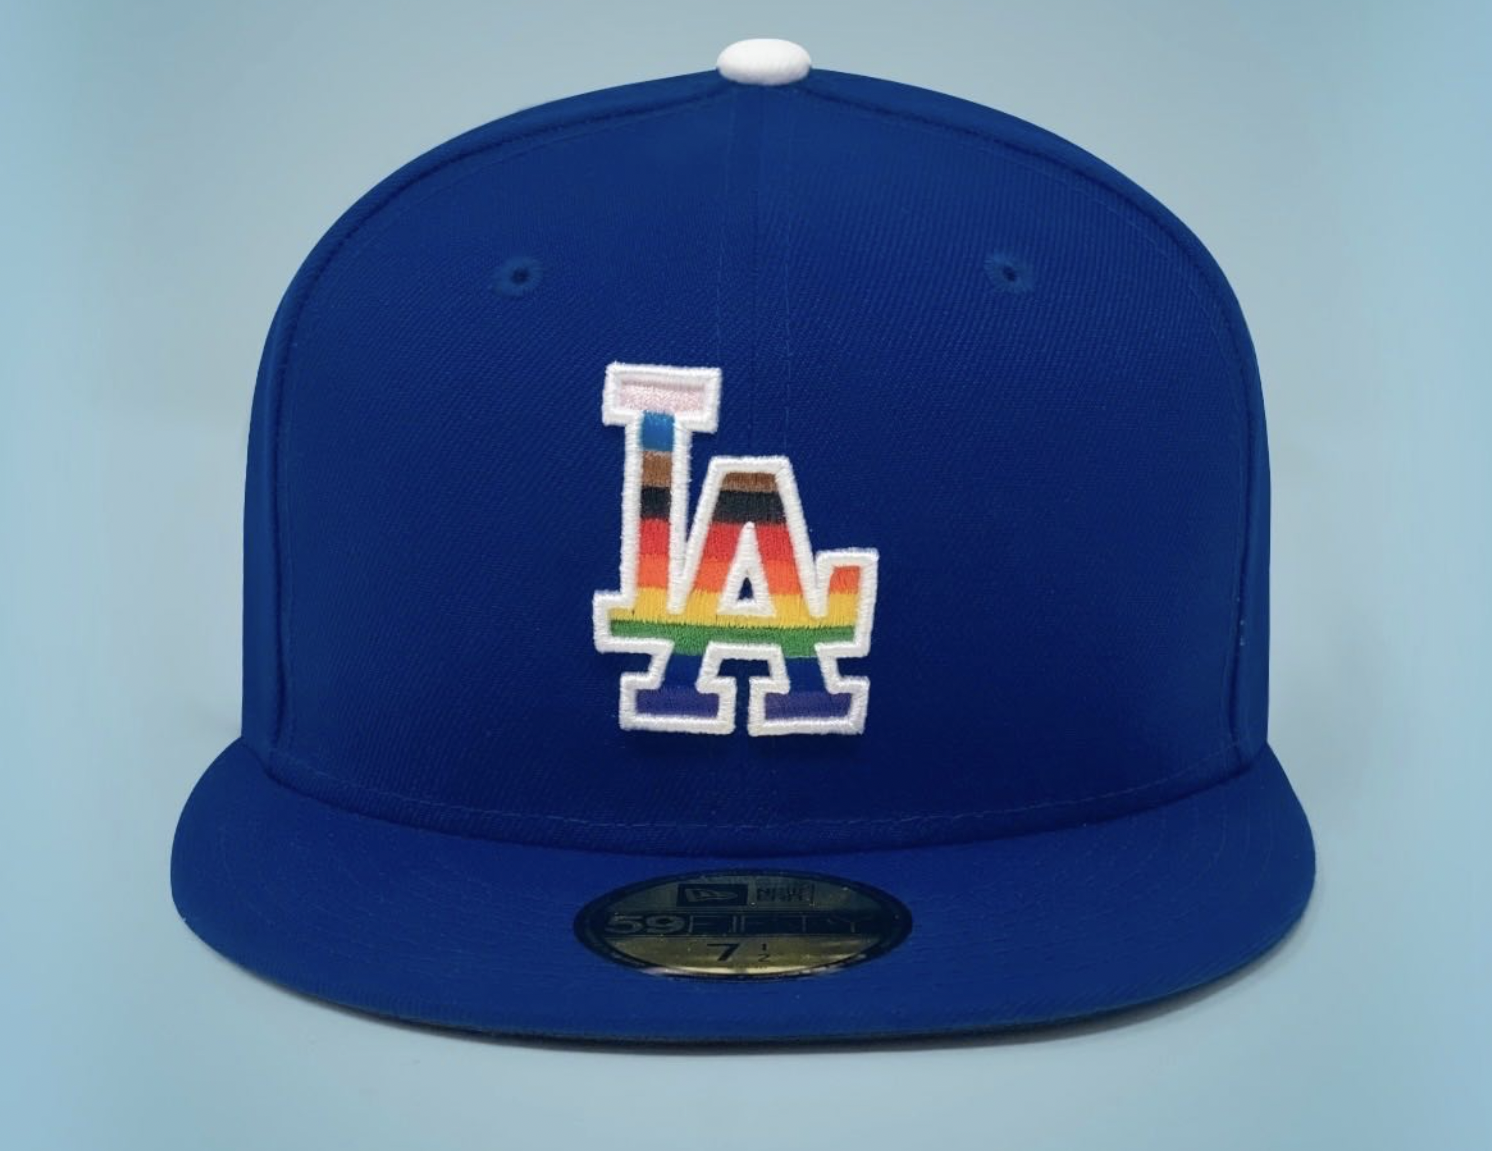 LA Dodgers to wear special Pride caps in 2 games next month